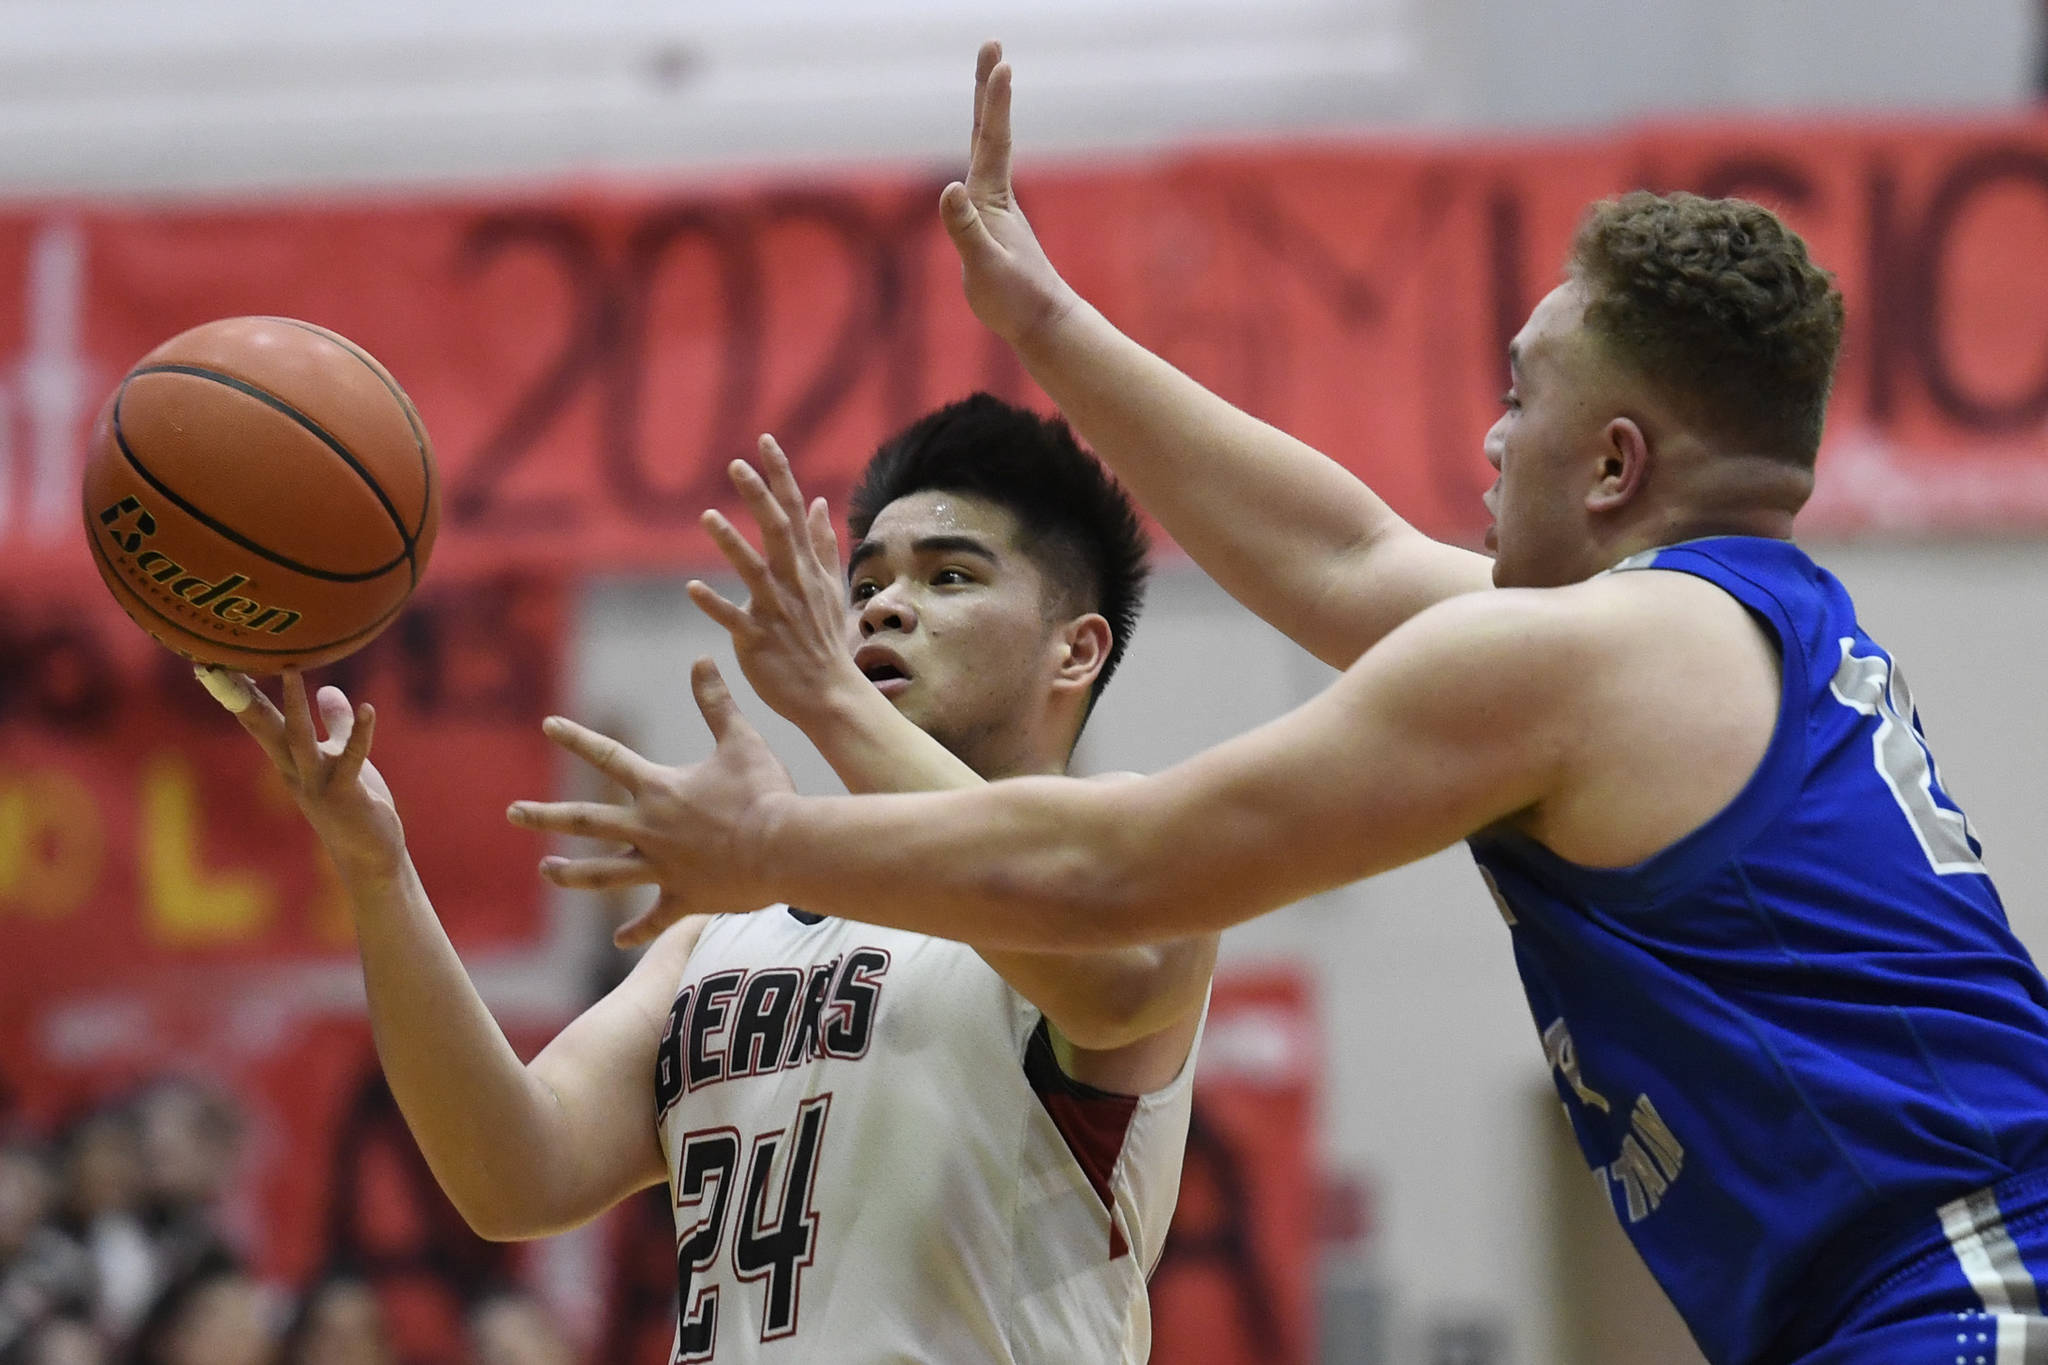 Juneau-Douglas’ Philip Gonzales, left, is pressured by Thunder Mountain’s Puna Toutaiolepo at JDHS on Friday, Jan. 25, 2019. After losing on Friday, JDHS won 60-54 on Saturday. (Michael Penn | Juneau Empire File)